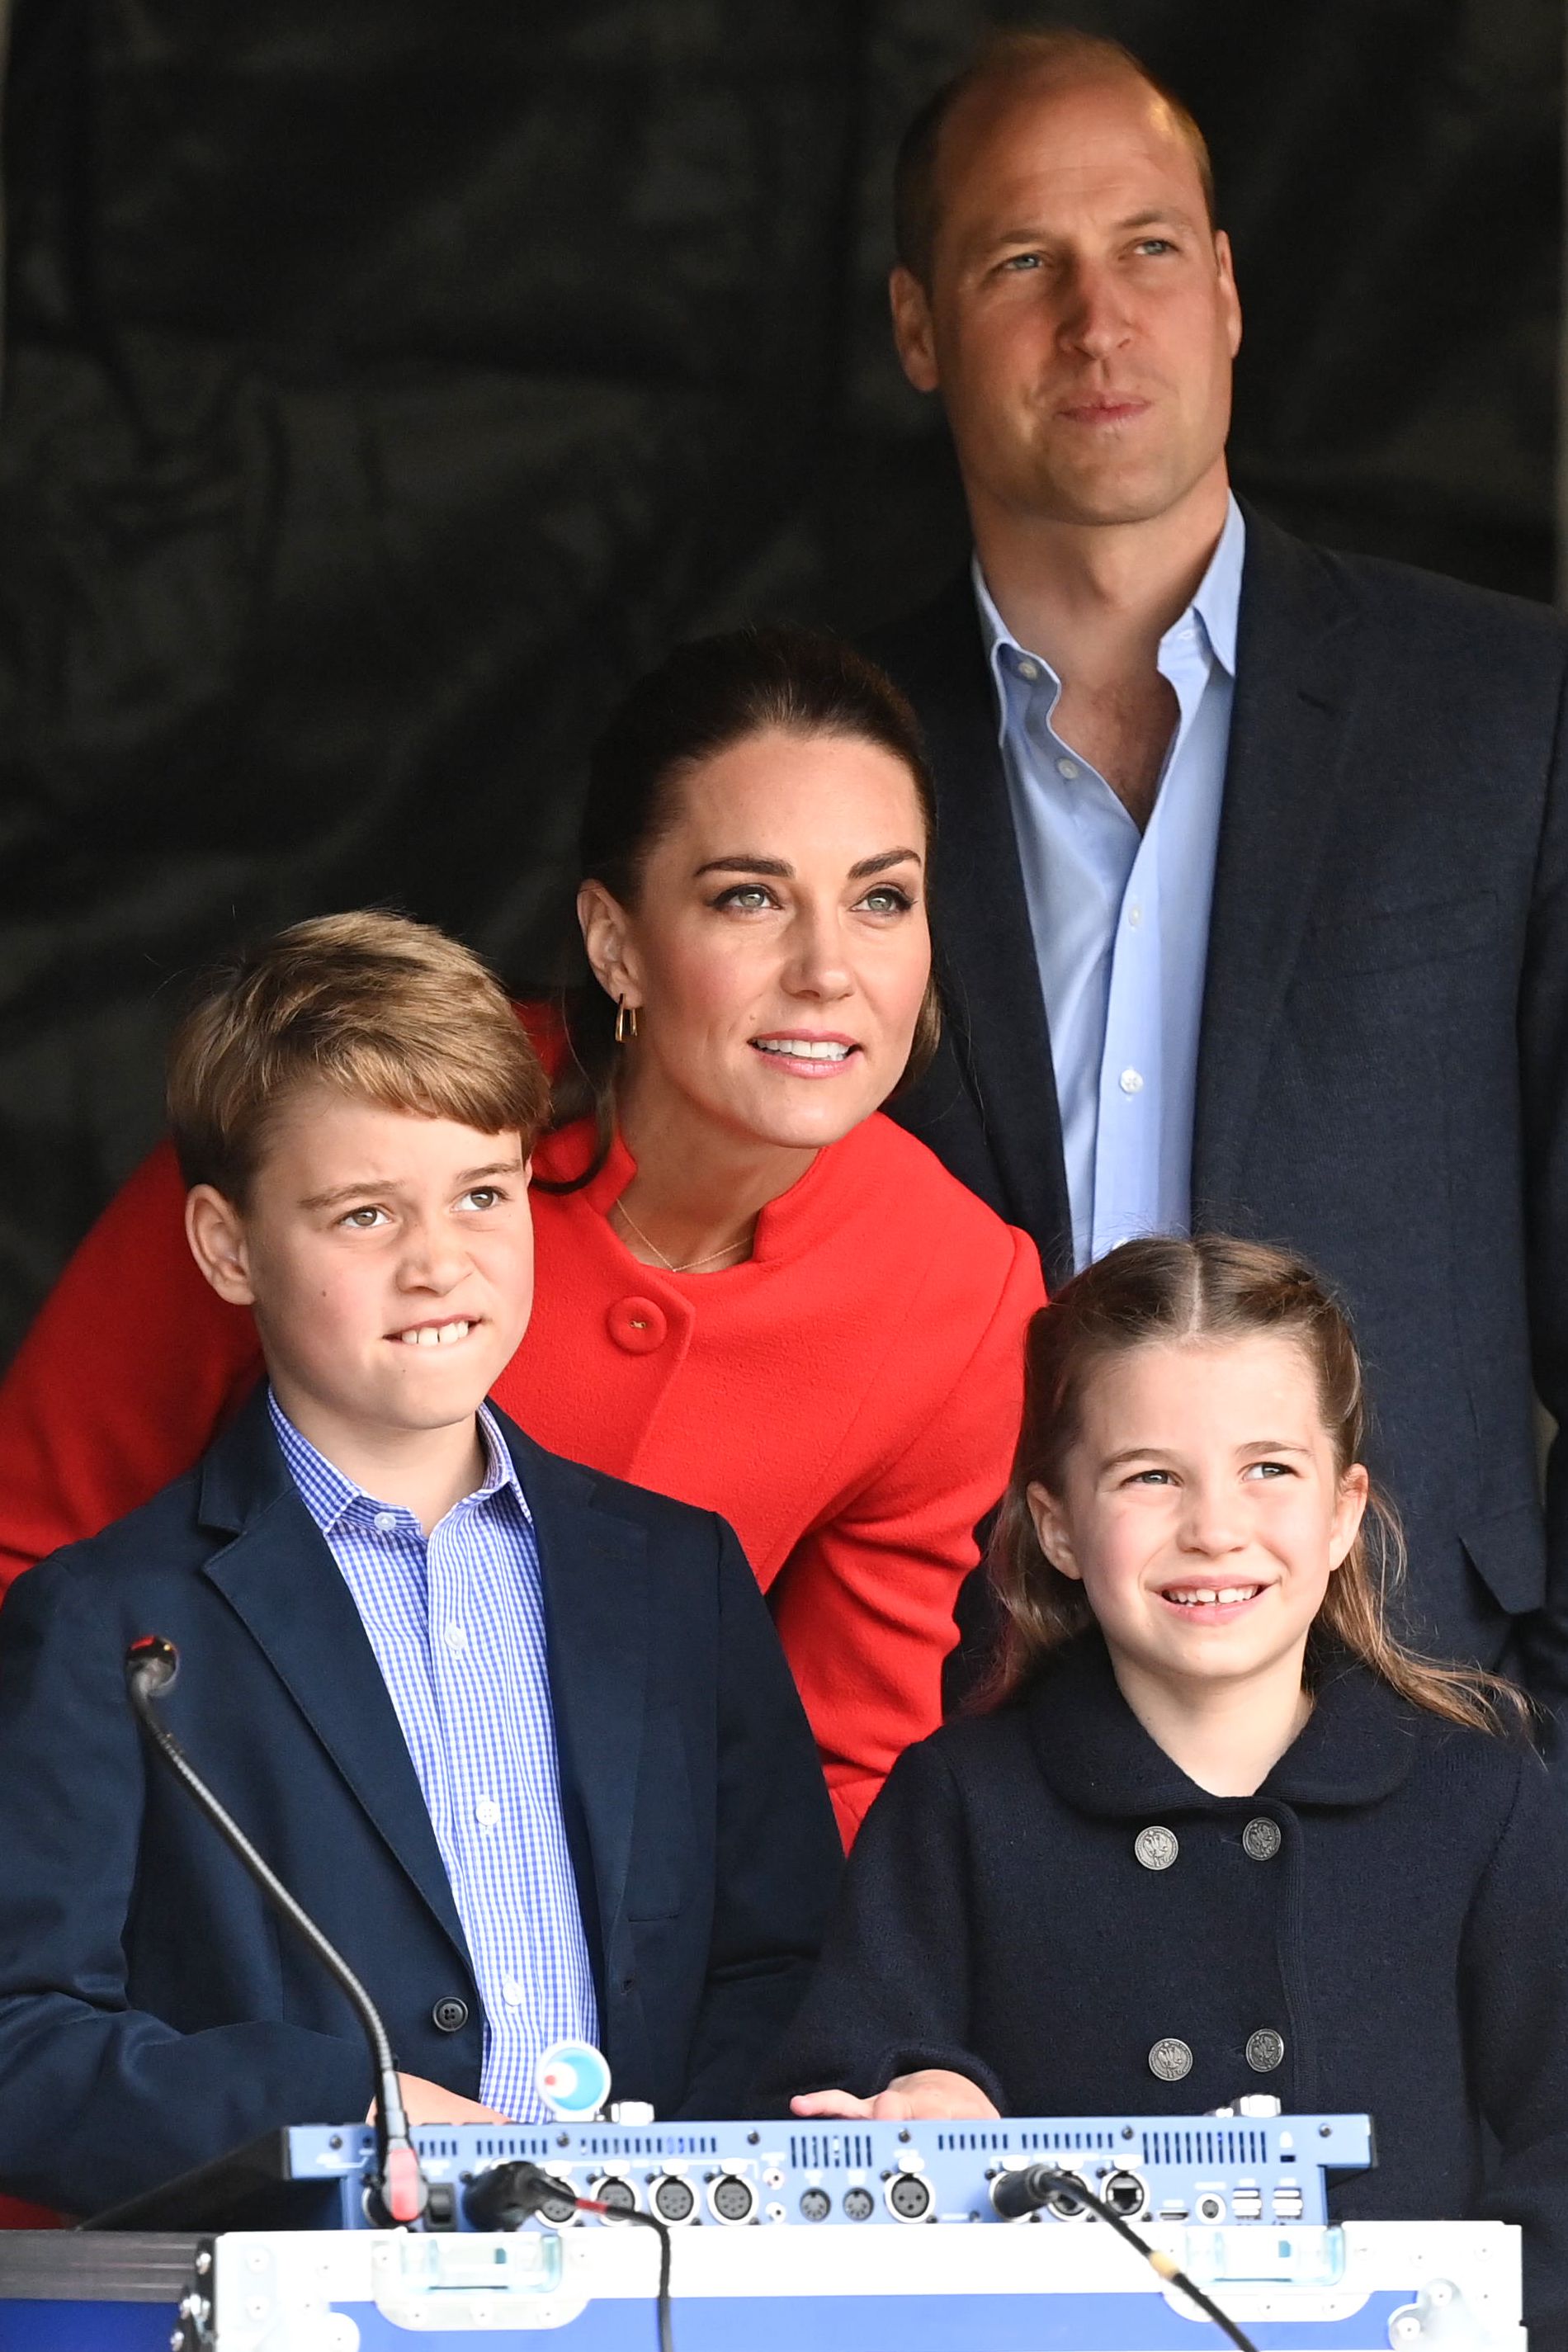 <p><a href="https://www.wonderwall.com/celebrity/profiles/overview/prince-william-482.article">Prince William</a>, <a href="https://www.wonderwall.com/celebrity/profiles/overview/duchess-kate-1356.article">Duchess Kate</a> and their children -- Prince George and Princess Charlotte -- checked out the music setup backstage during a visit to Cardiff Castle in Wales on June 4, 2022, as part of the royal family's tour for Queen Elizabeth II's <a href="https://www.wonderwall.com/celebrity/royals/platinum-jubilee-see-the-best-photos-from-4-days-of-celebrations-marking-the-queens-70-year-reign-606239.gallery">Platinum Jubilee celebrations</a>. </p>